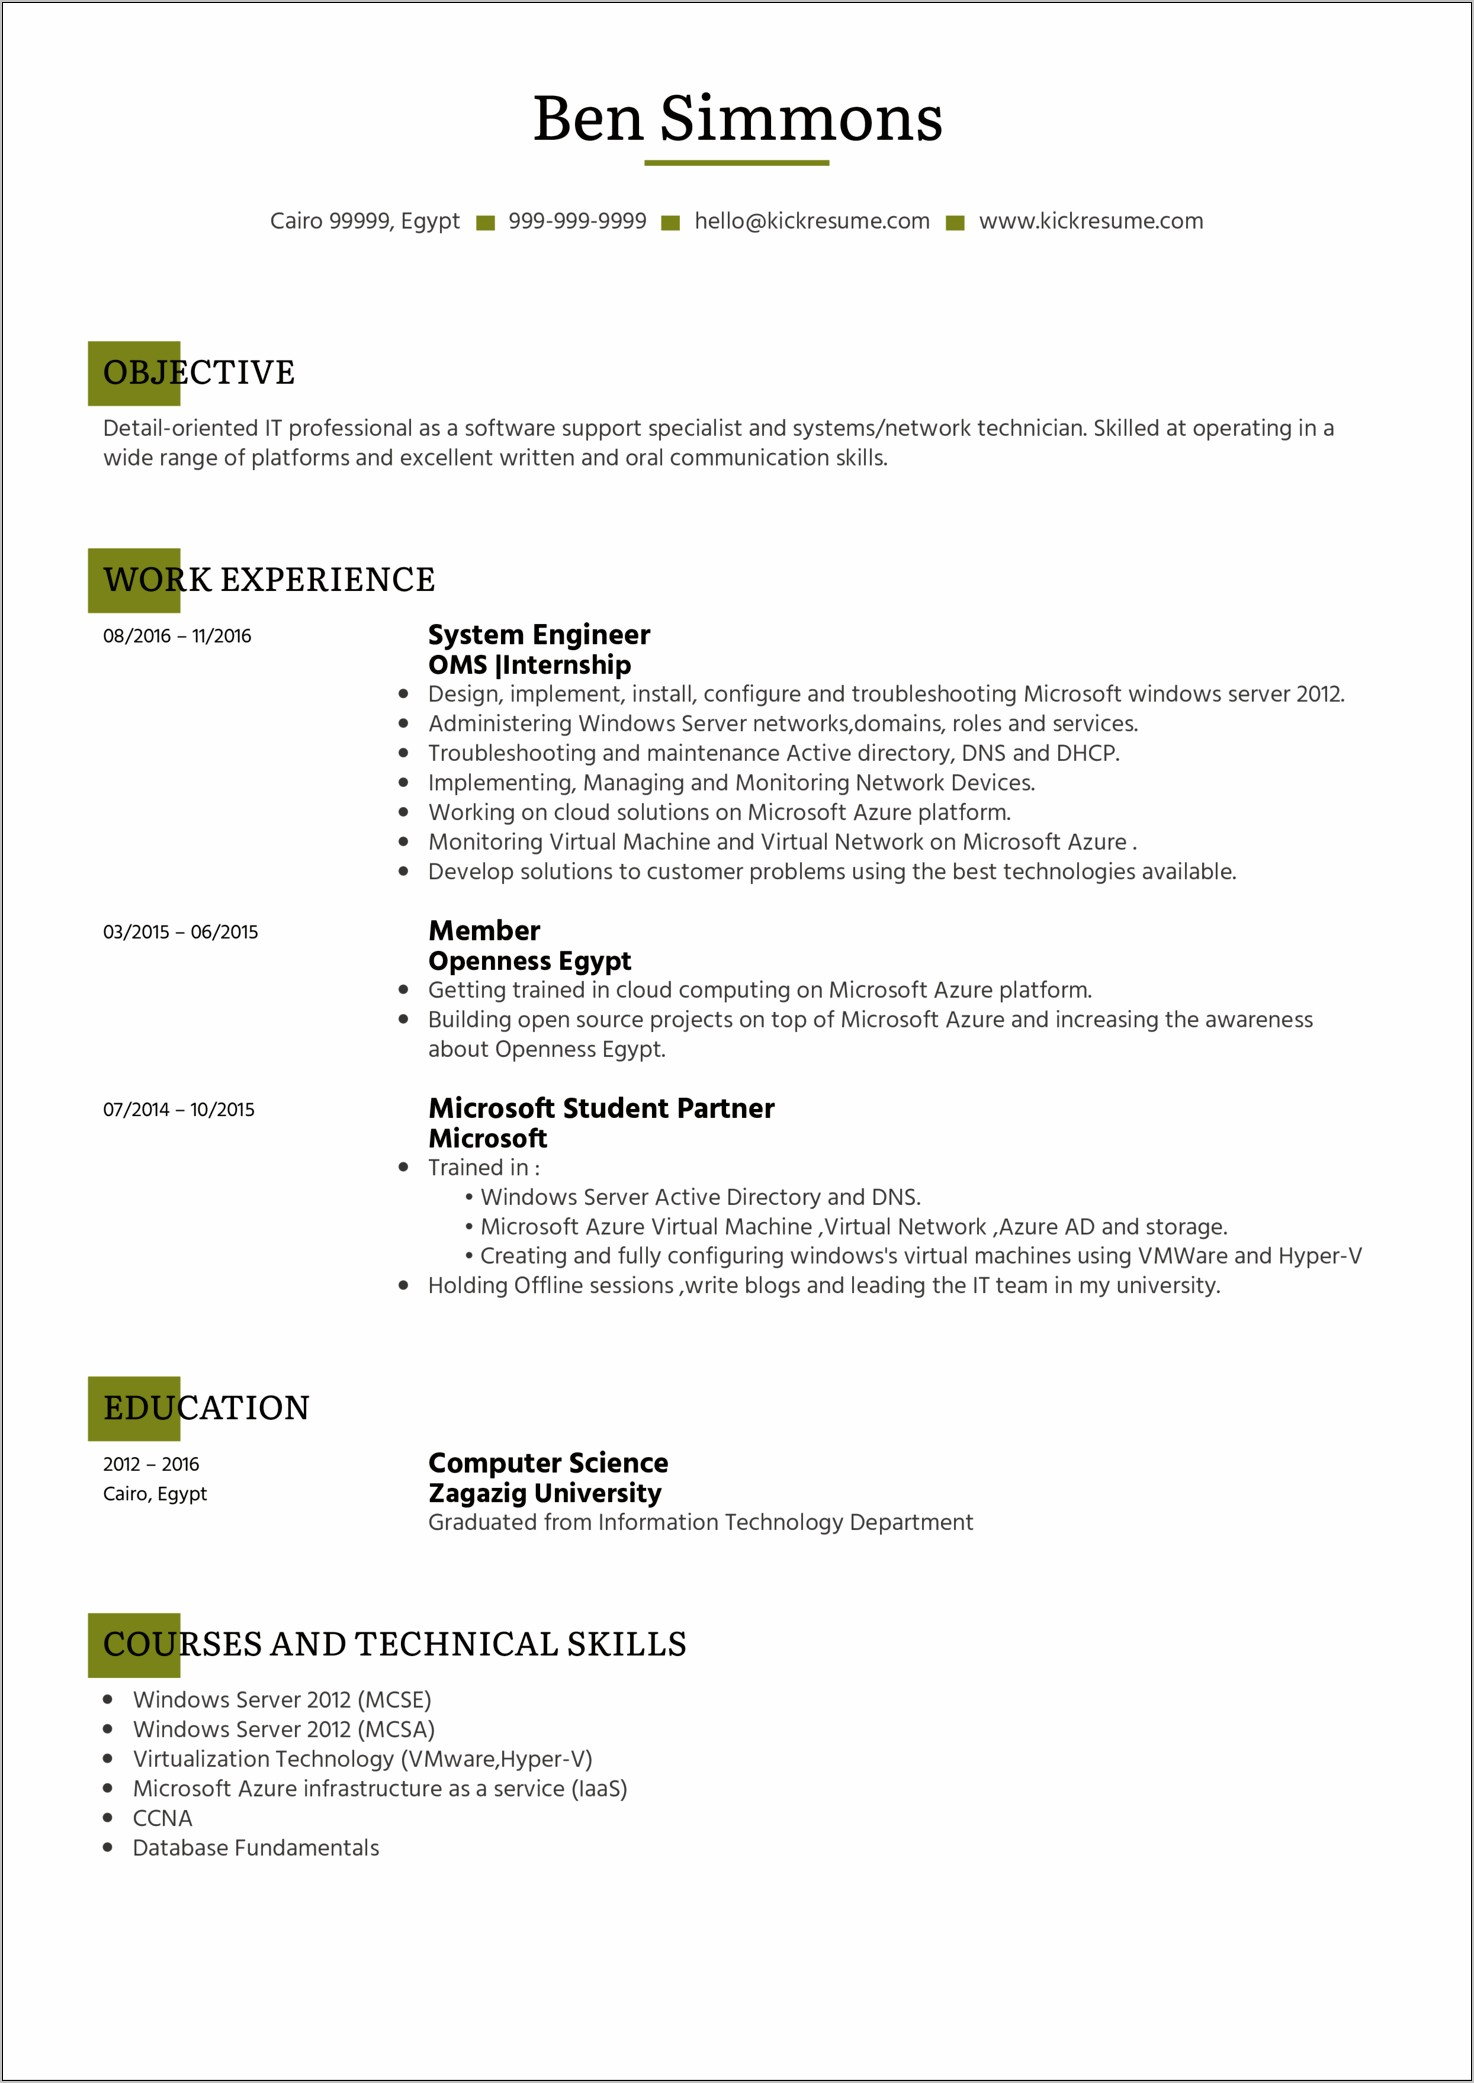 Resume Objective In Information Technology